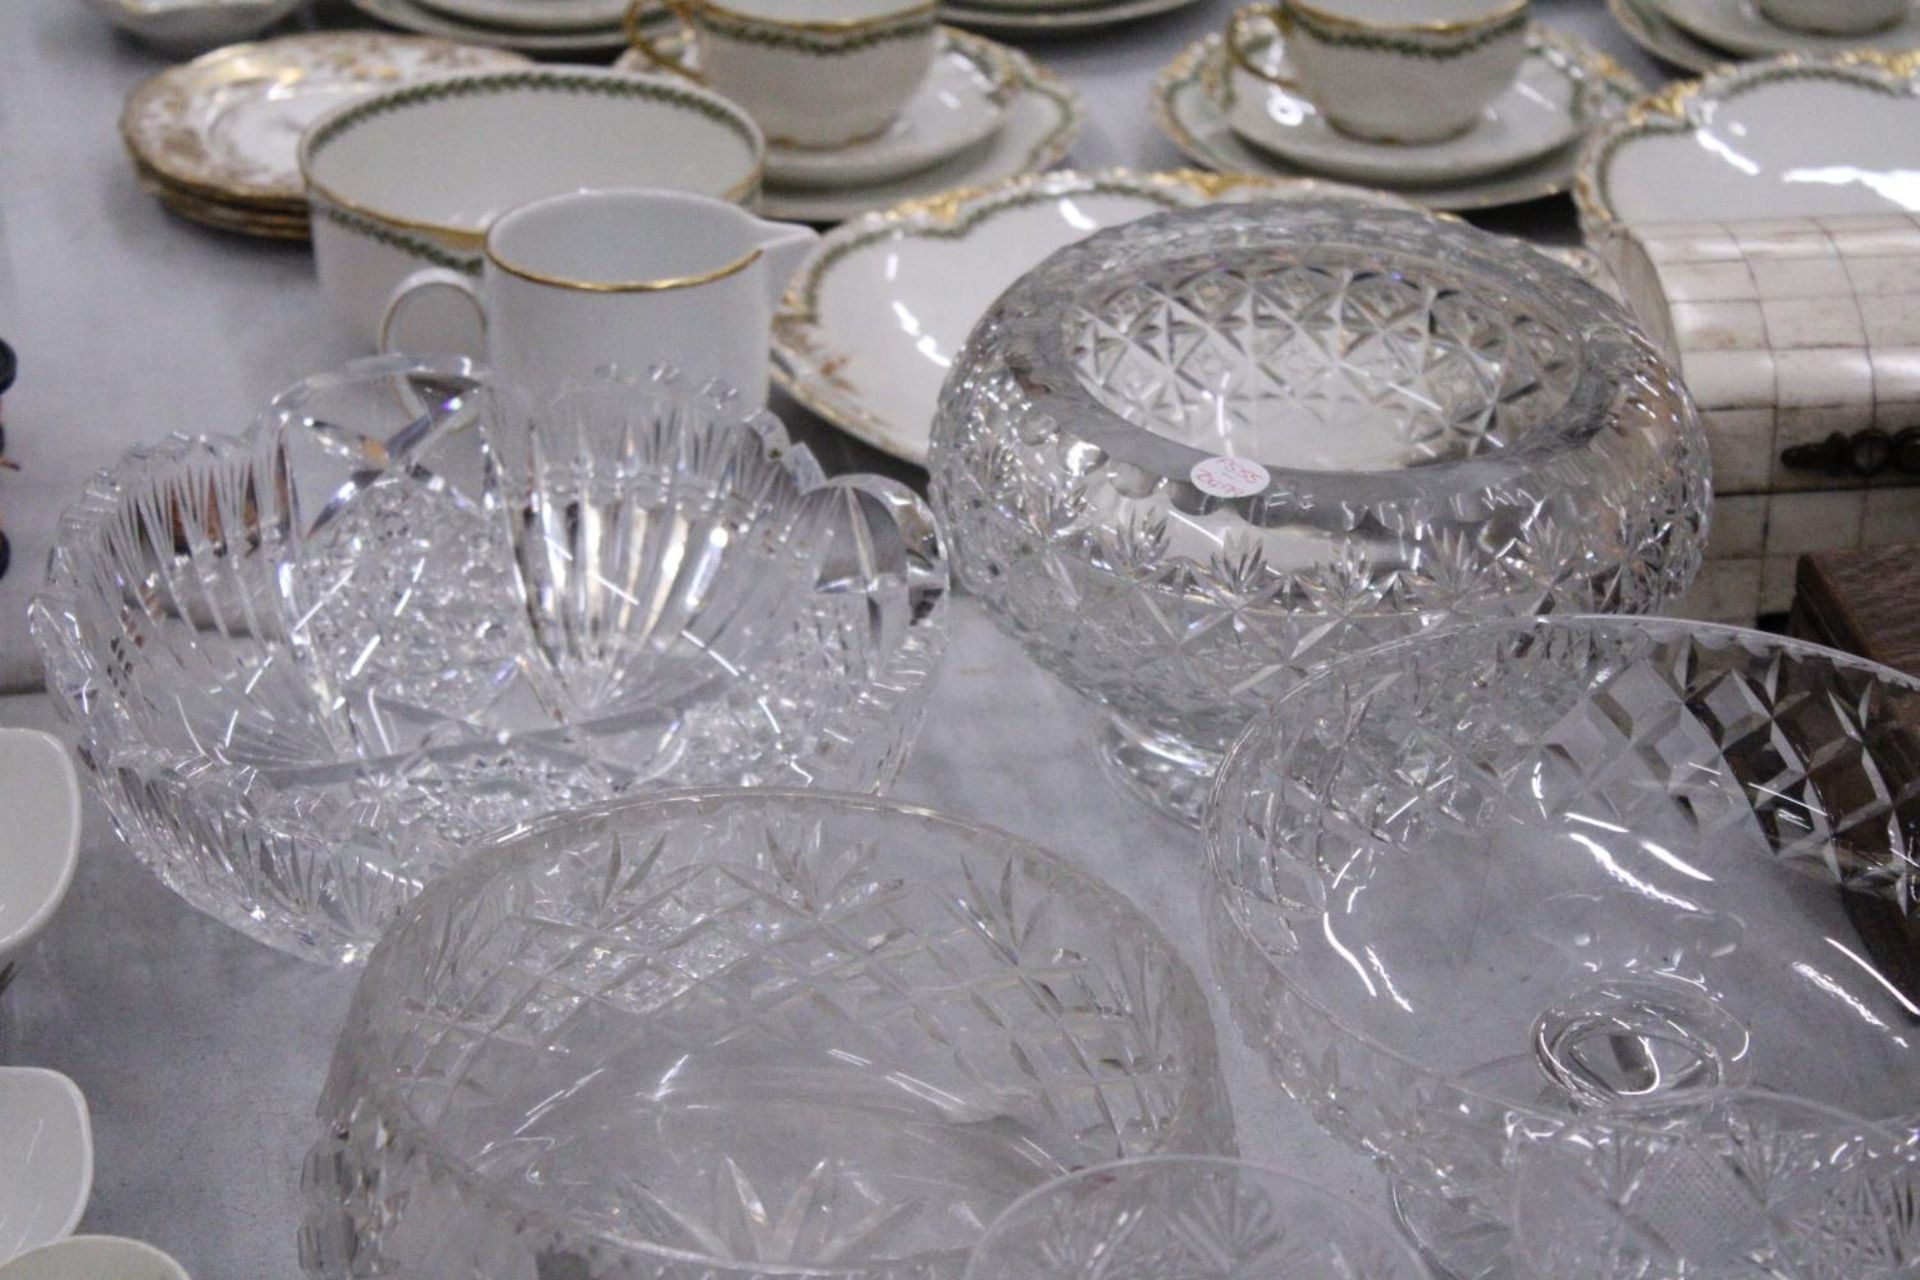 A LARGE QUANTITY OF GLASSWARE TO INCLUDE BOWLS, VASES, WINE GLASSES, ETC - Image 5 of 6